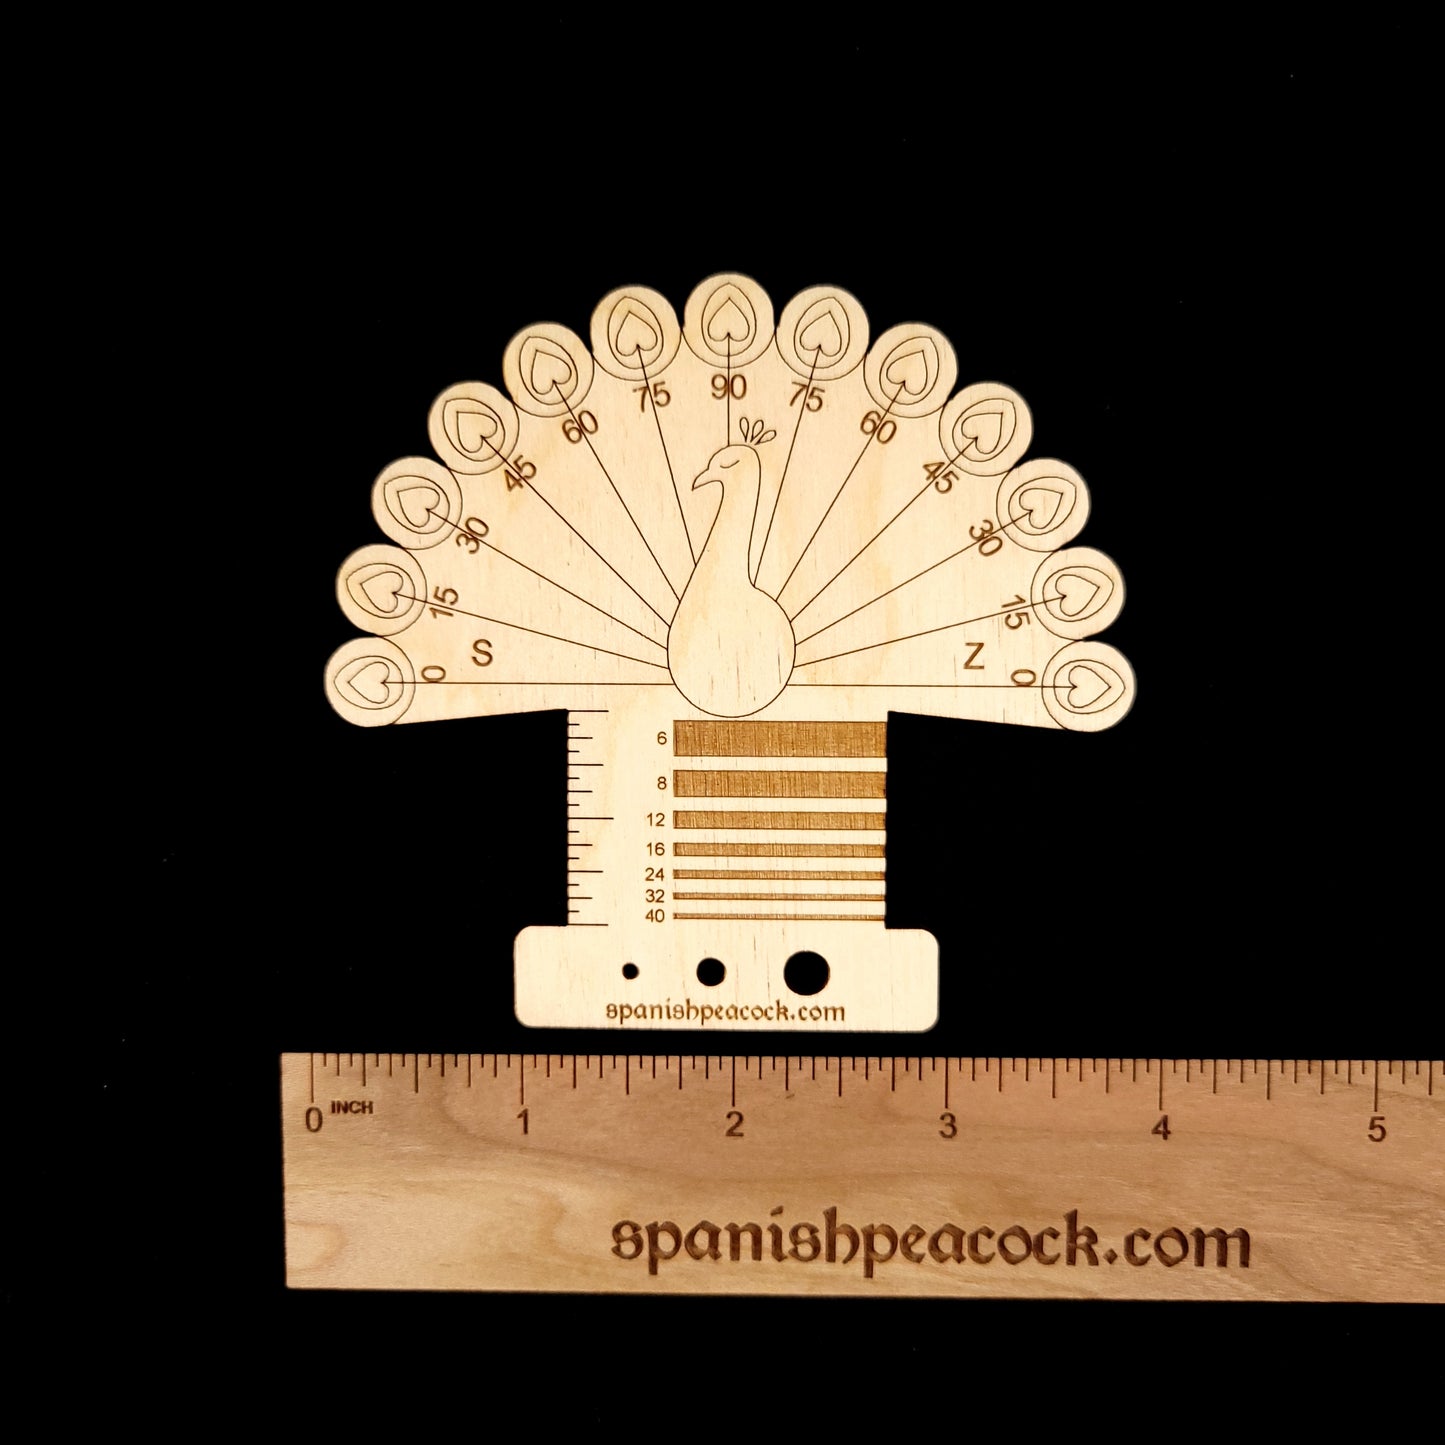 Spanish Peacock Spinner Control Card